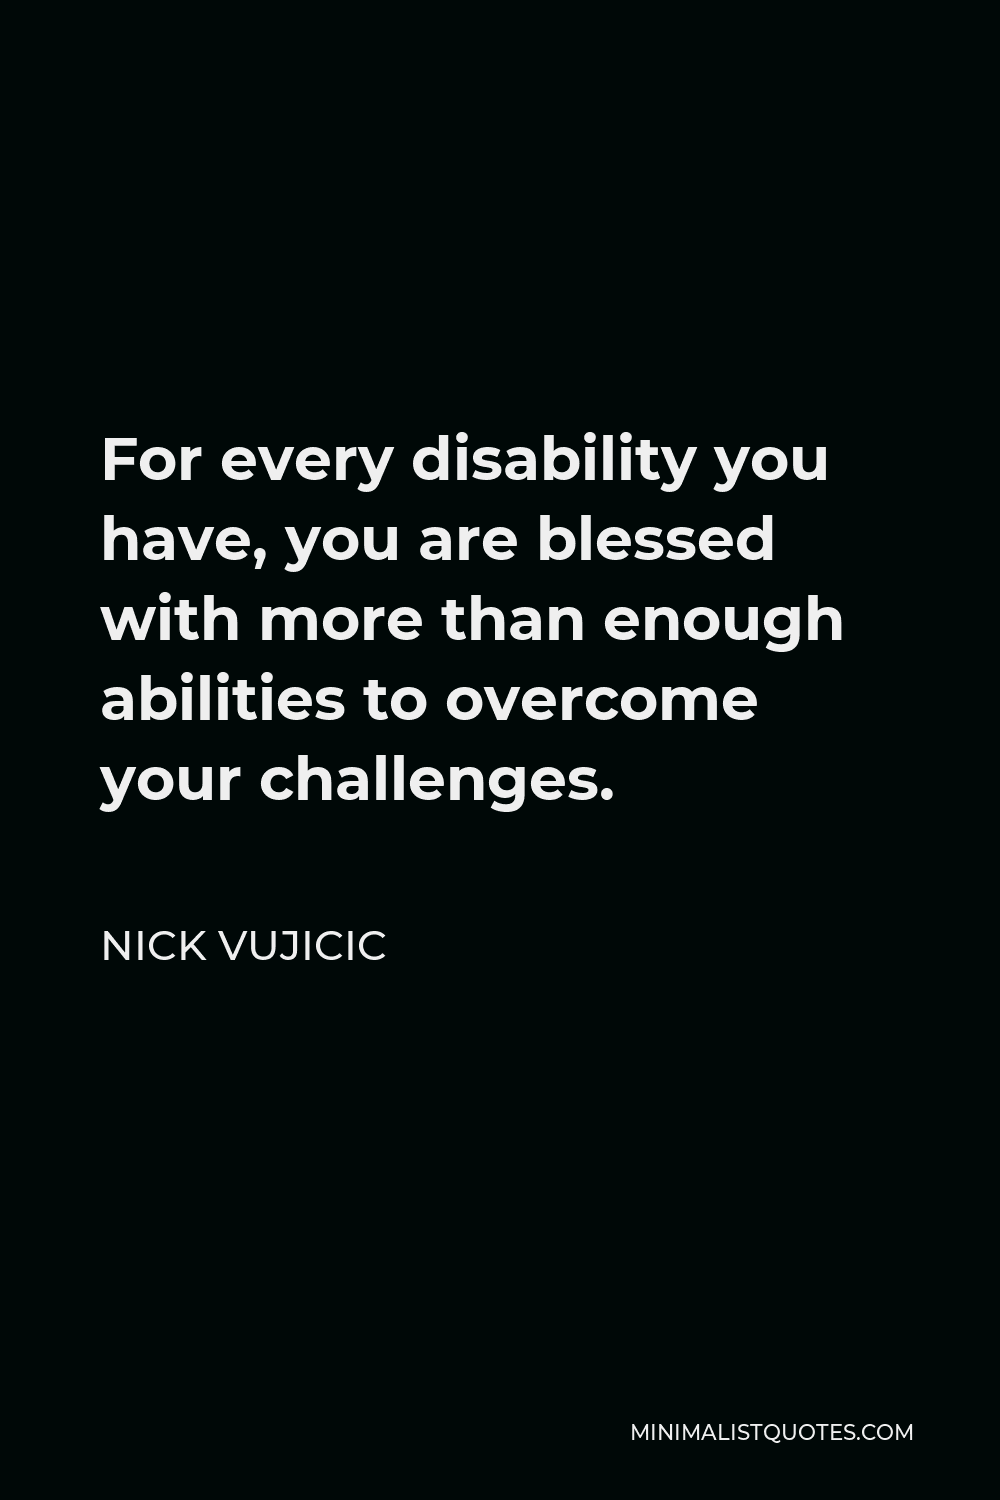 Nick Vujicic Quote - For every disability you have, you are blessed with more than enough abilities to overcome your challenges.